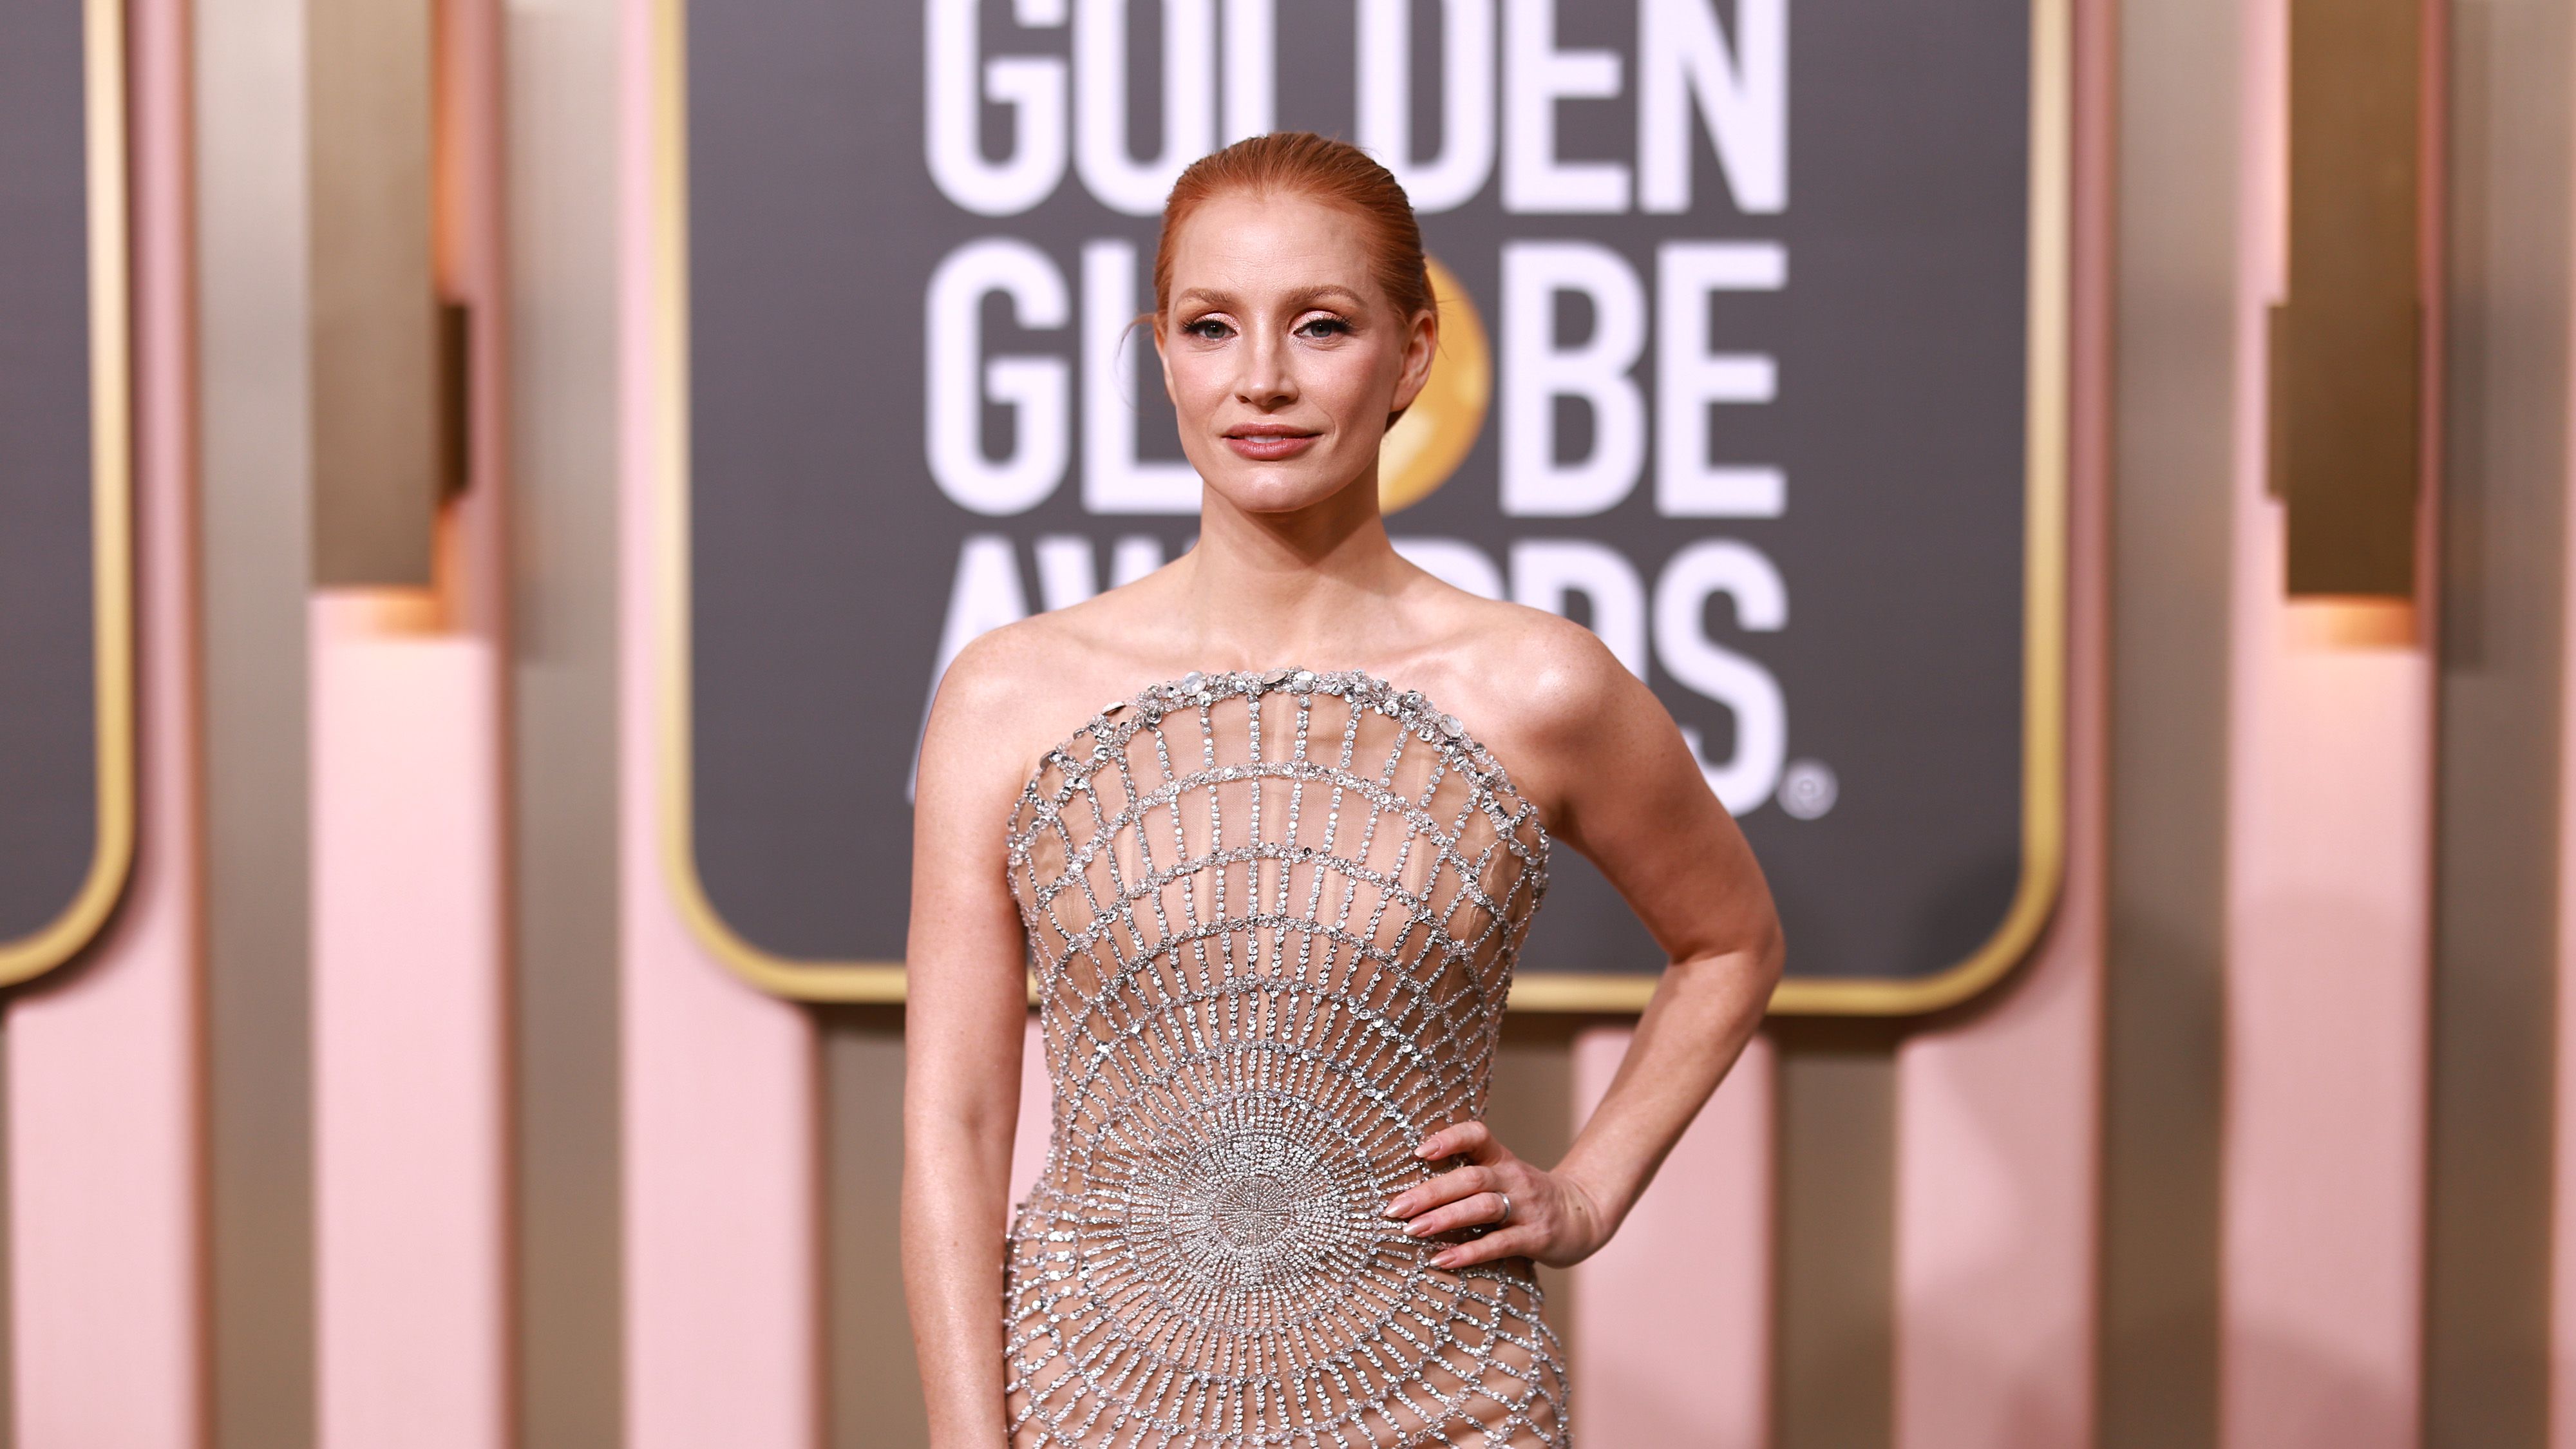 Jessica Chastain Porn Star - See Jessica Chastain Stun at the Golden Globes in a Jaw-Dropping Nude Dress